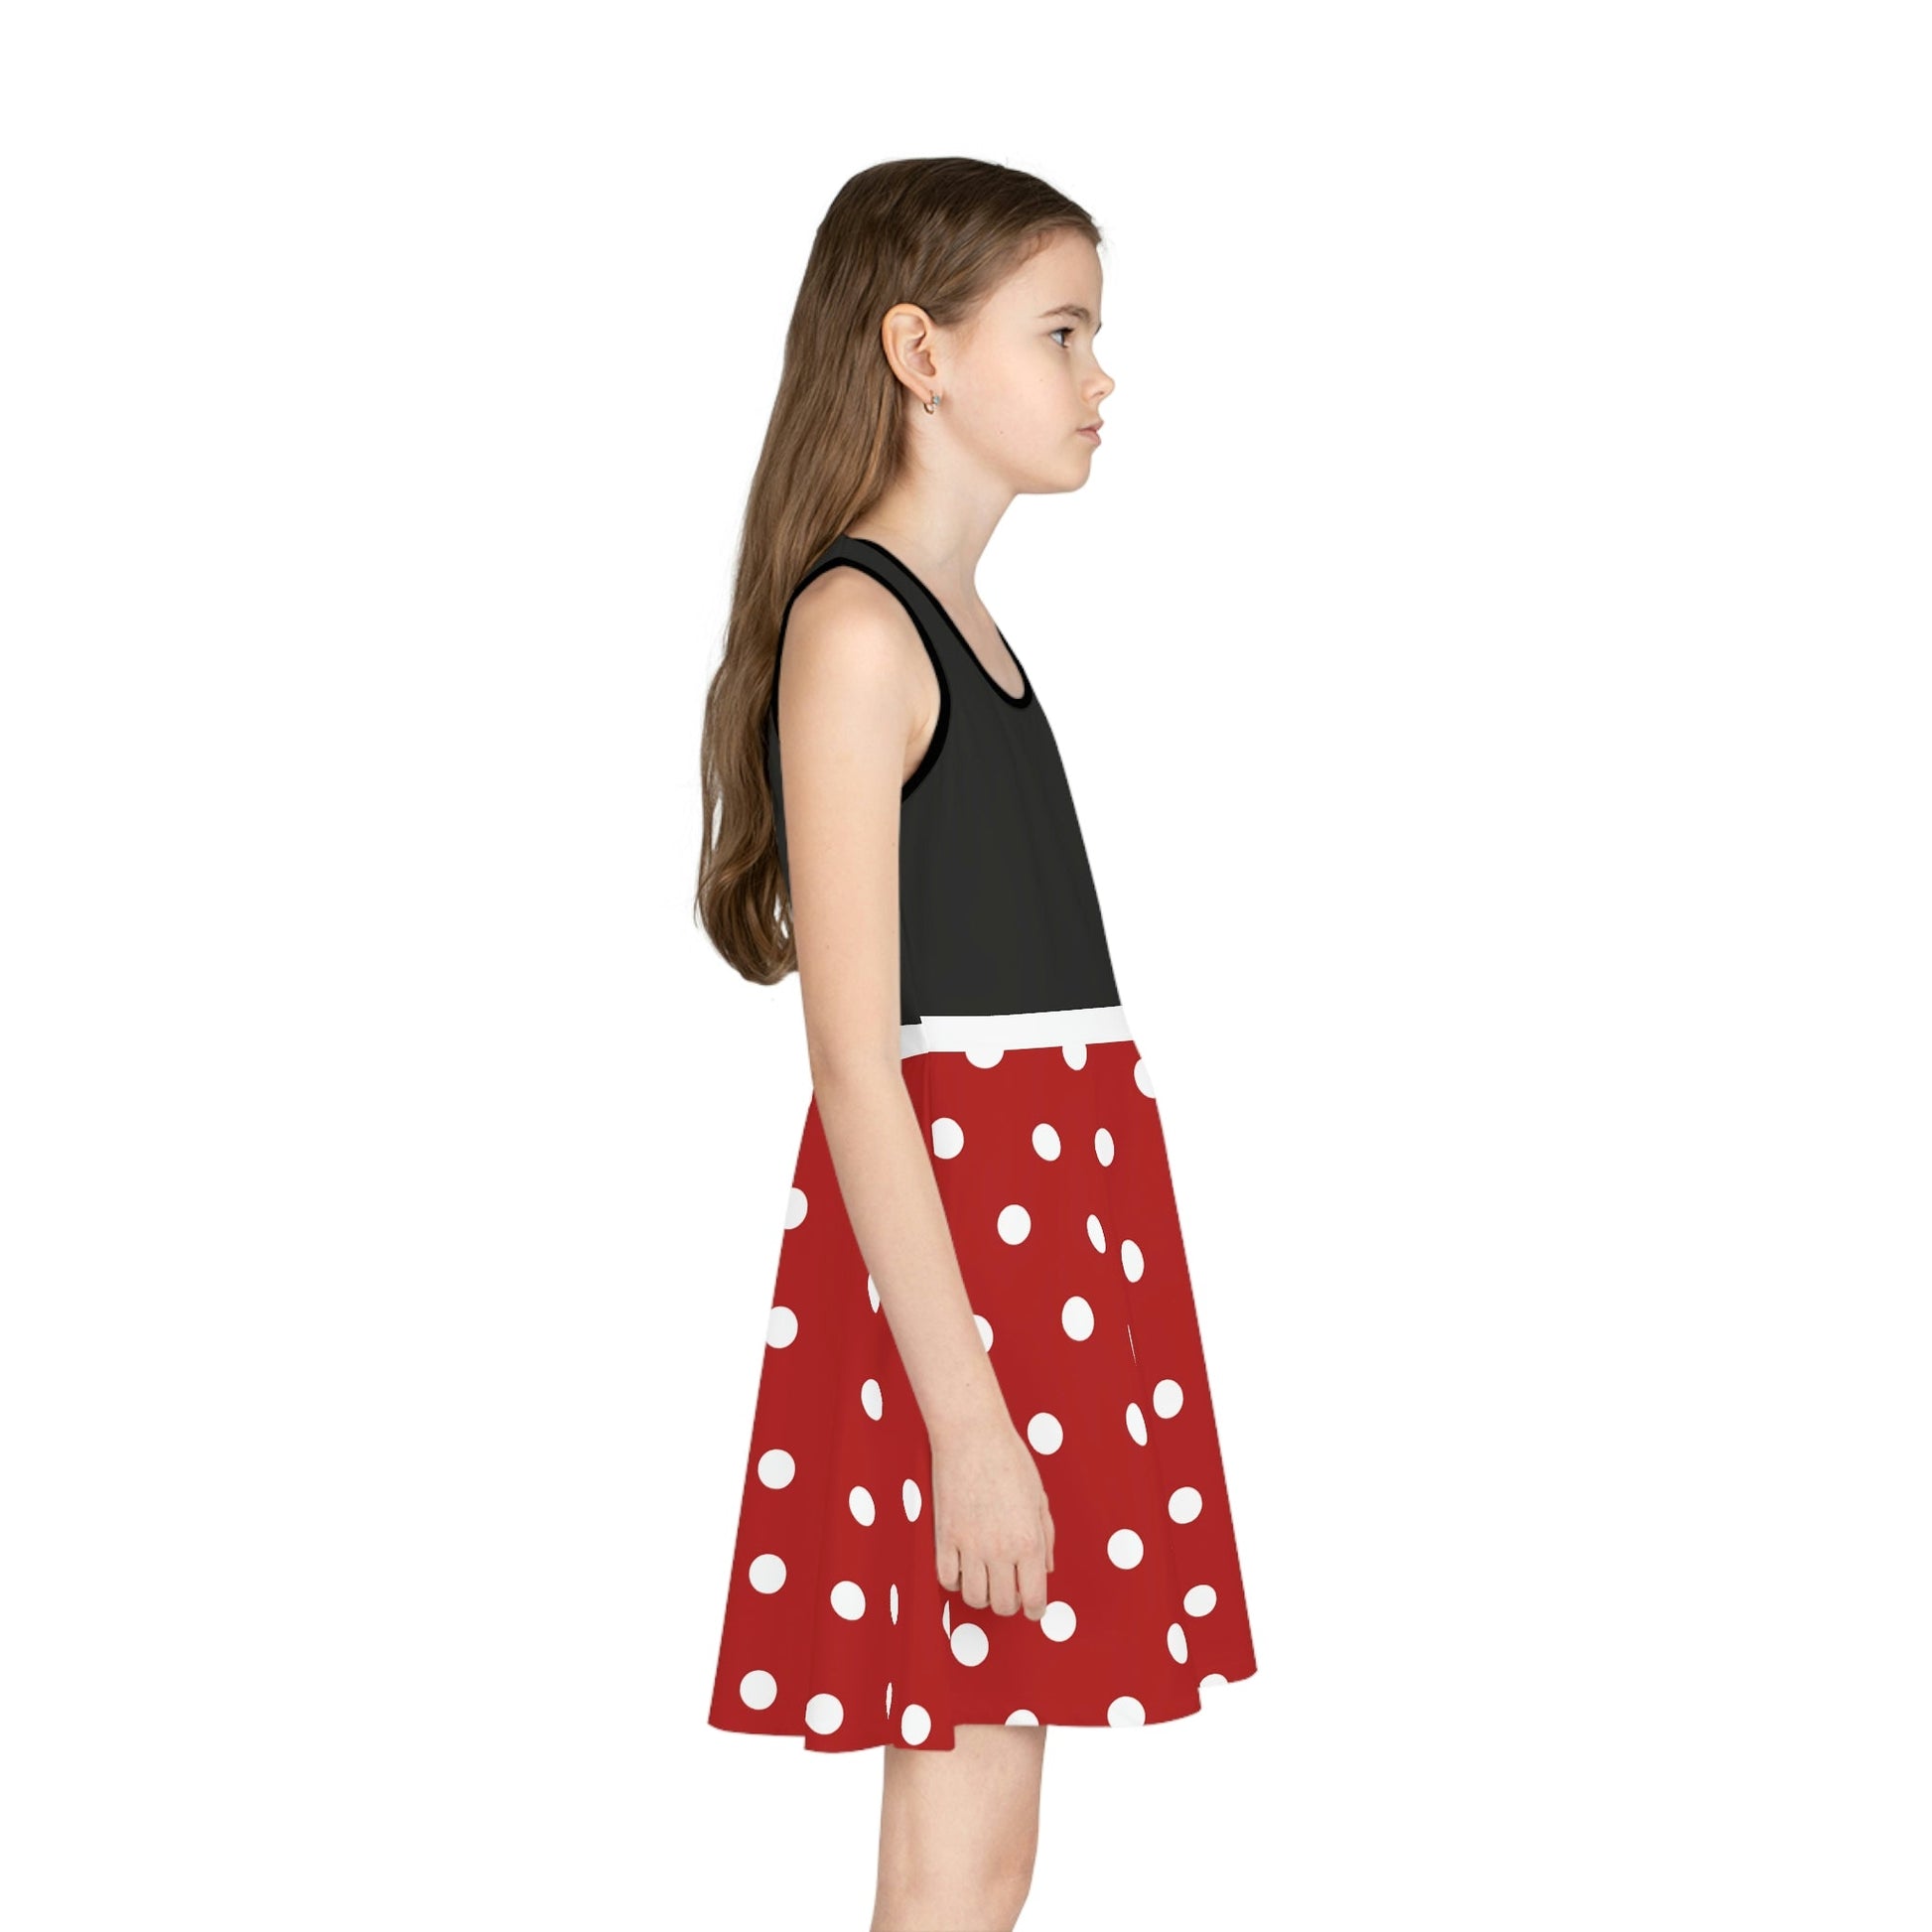 The Man Girls' Sleeveless Sundress (AOP) All Over PrintAOPAOP Clothing#tag4##tag5##tag6#